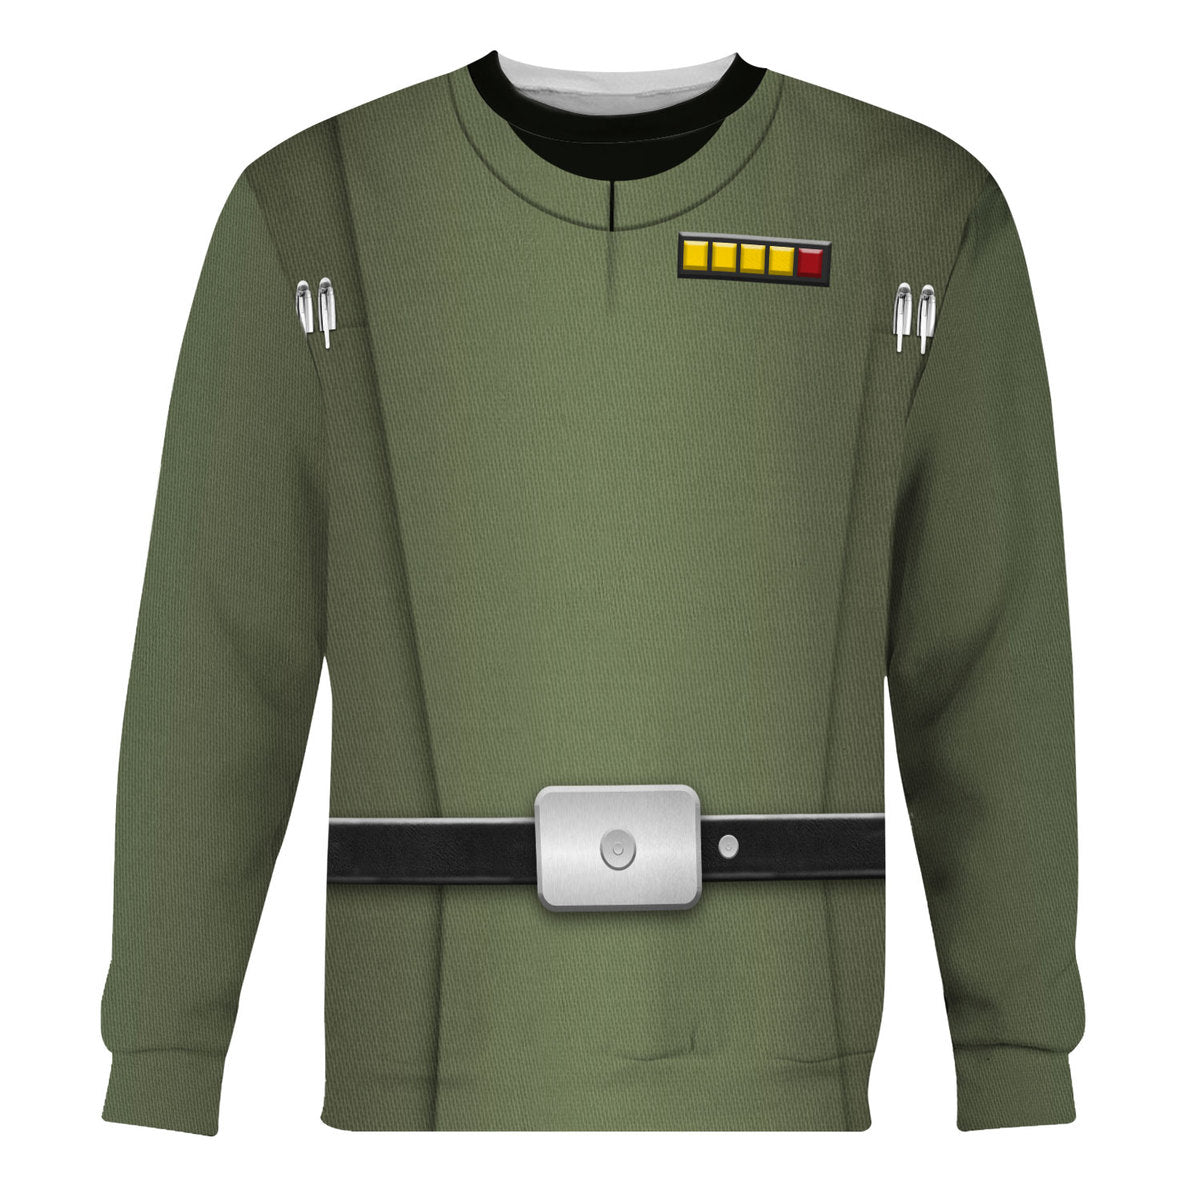 Star Wars Galen Erso Costume - Sweater - Ugly Christmas Sweater